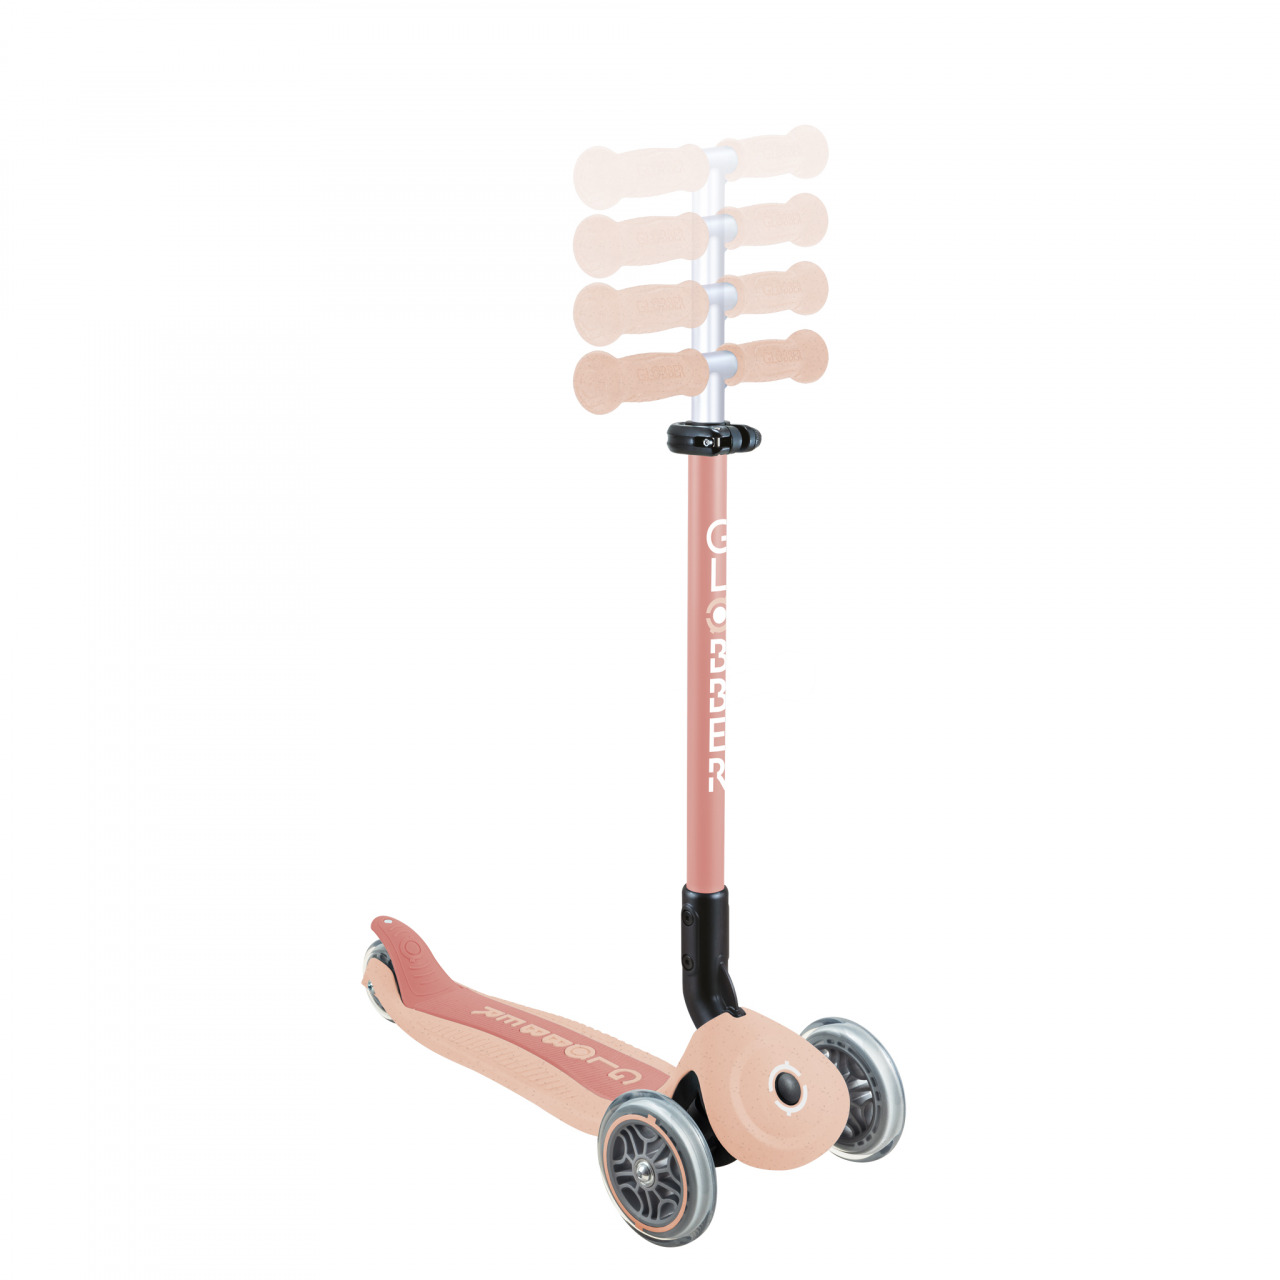 740 506 Adjustable Eco Scooter